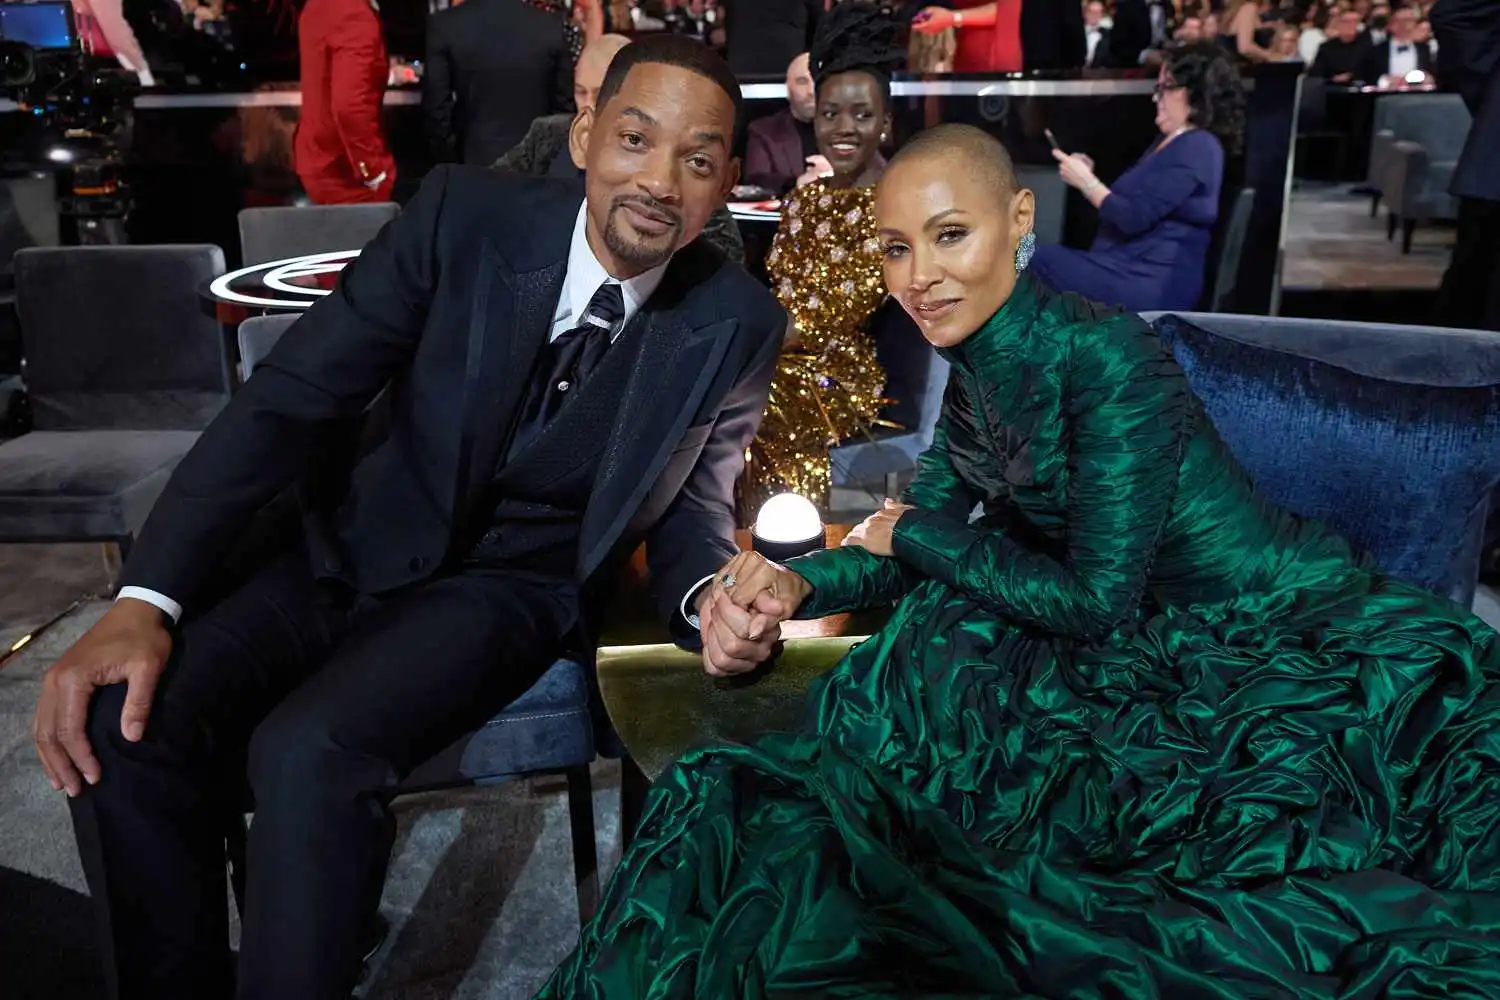 will-smith-set-to-make-a-big-move-for-pr-as-he-is-ready-to-address-jada-pinketts-split